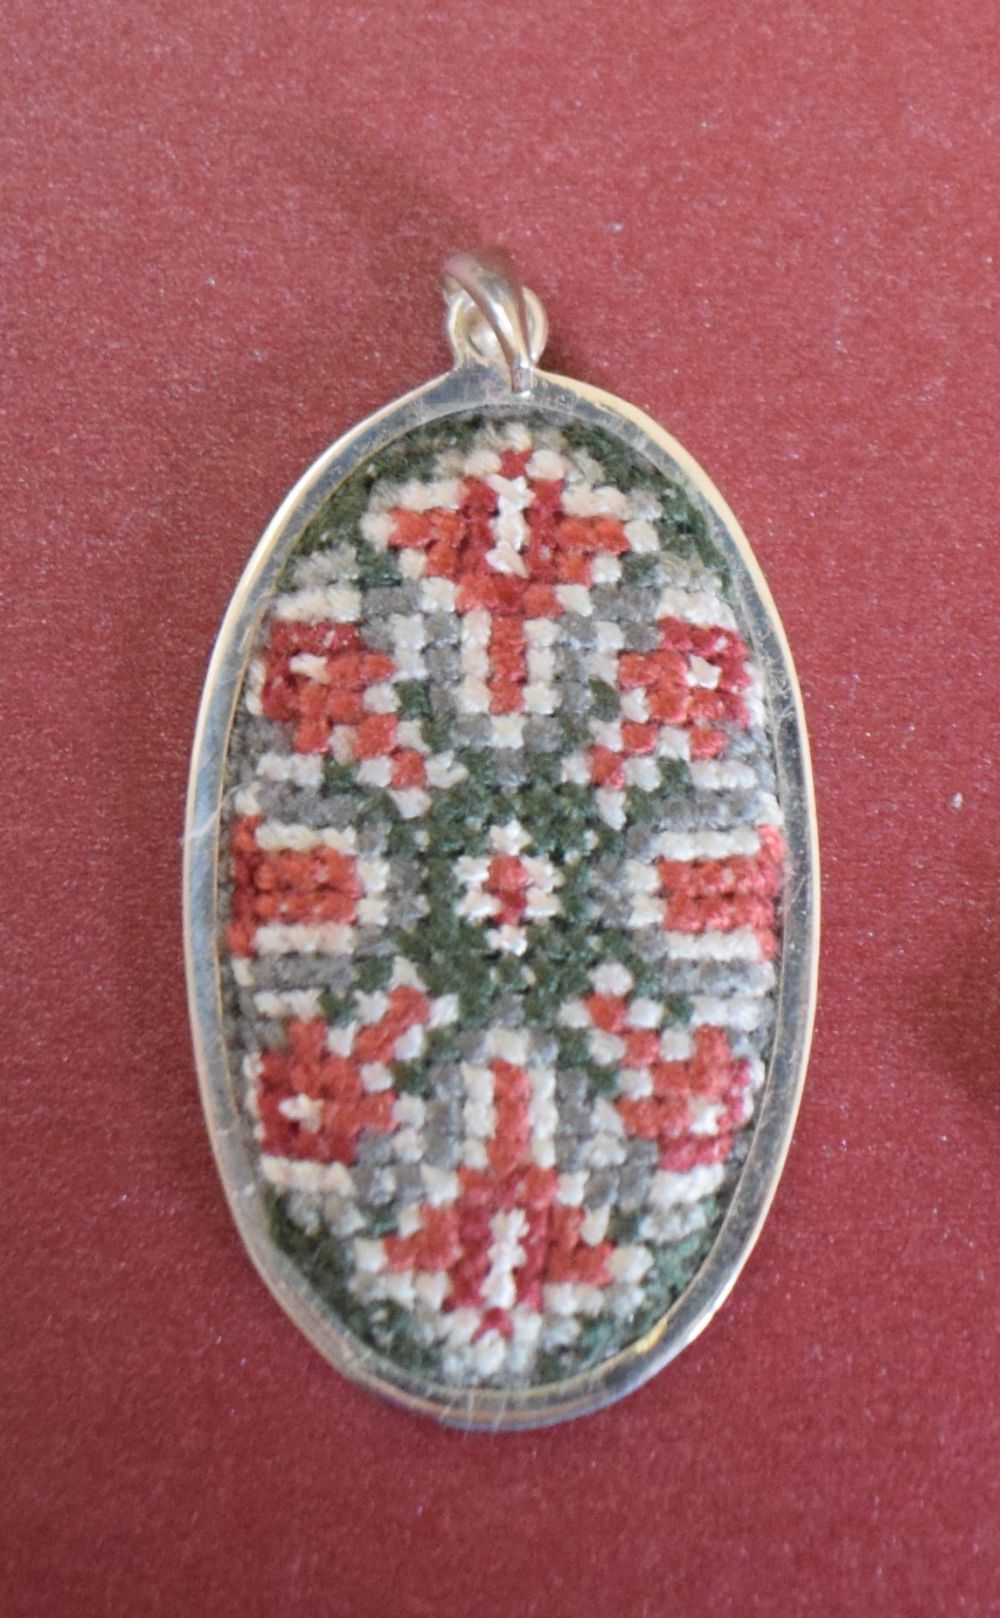 Embroidered Silver Pendant with Armenian Ornaments